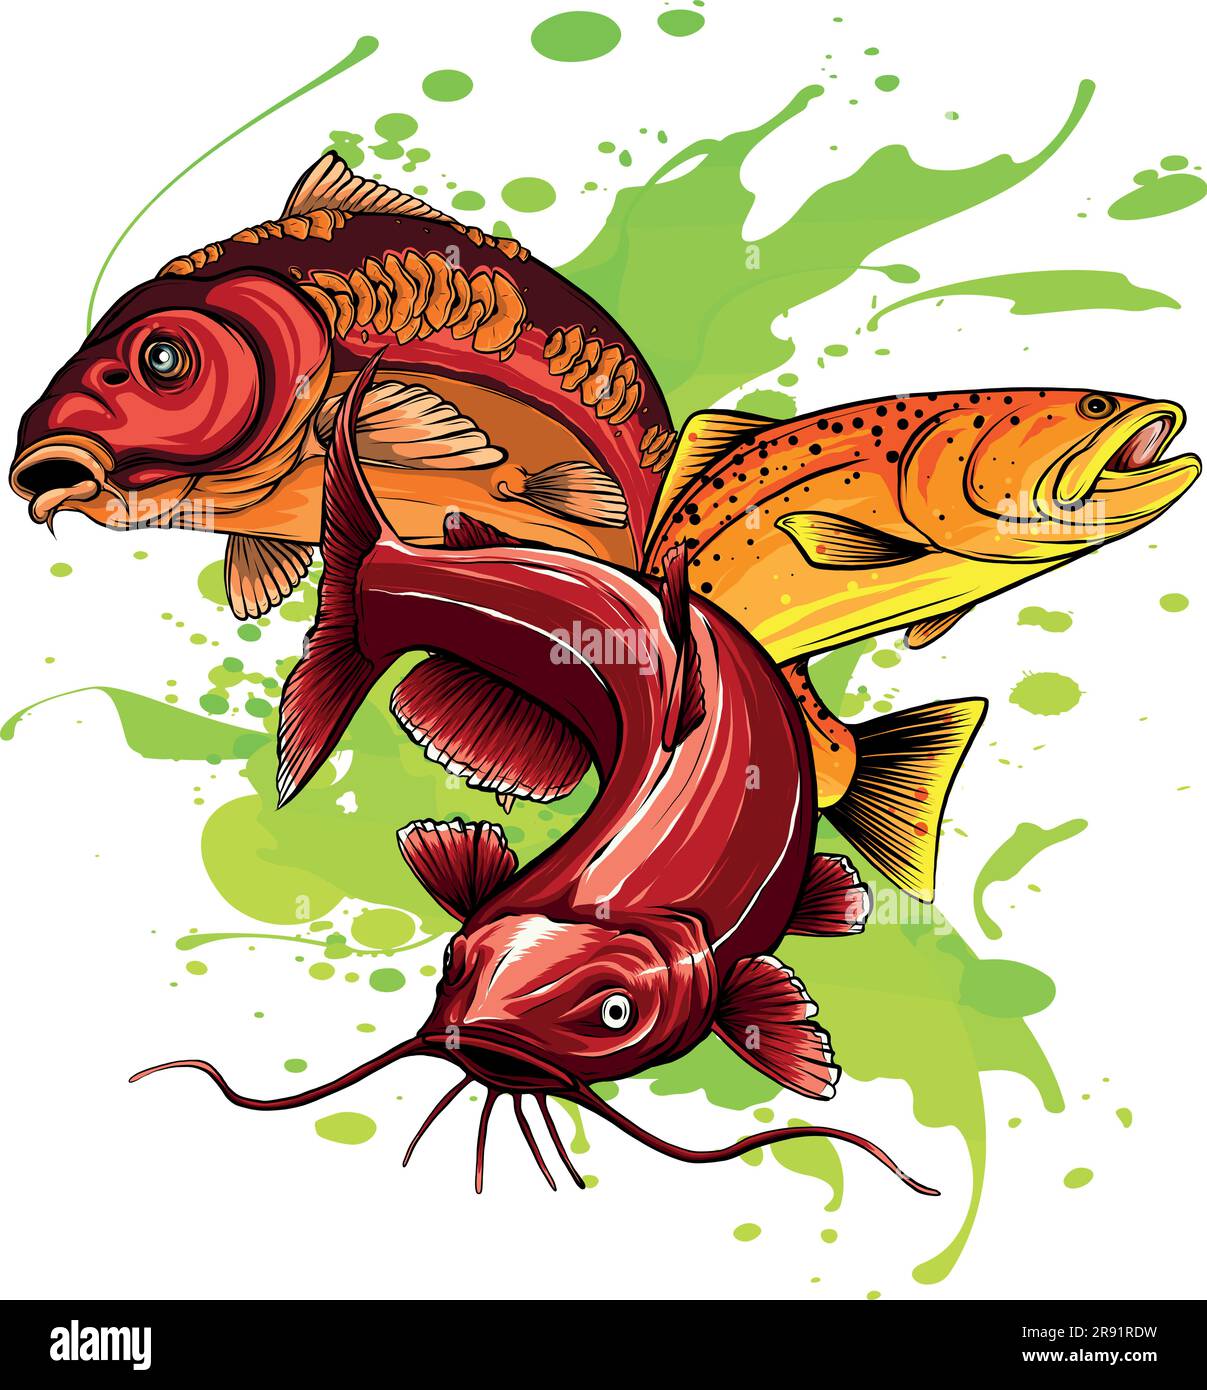 vector illustration of Various freshwater fishes design Stock Vector ...